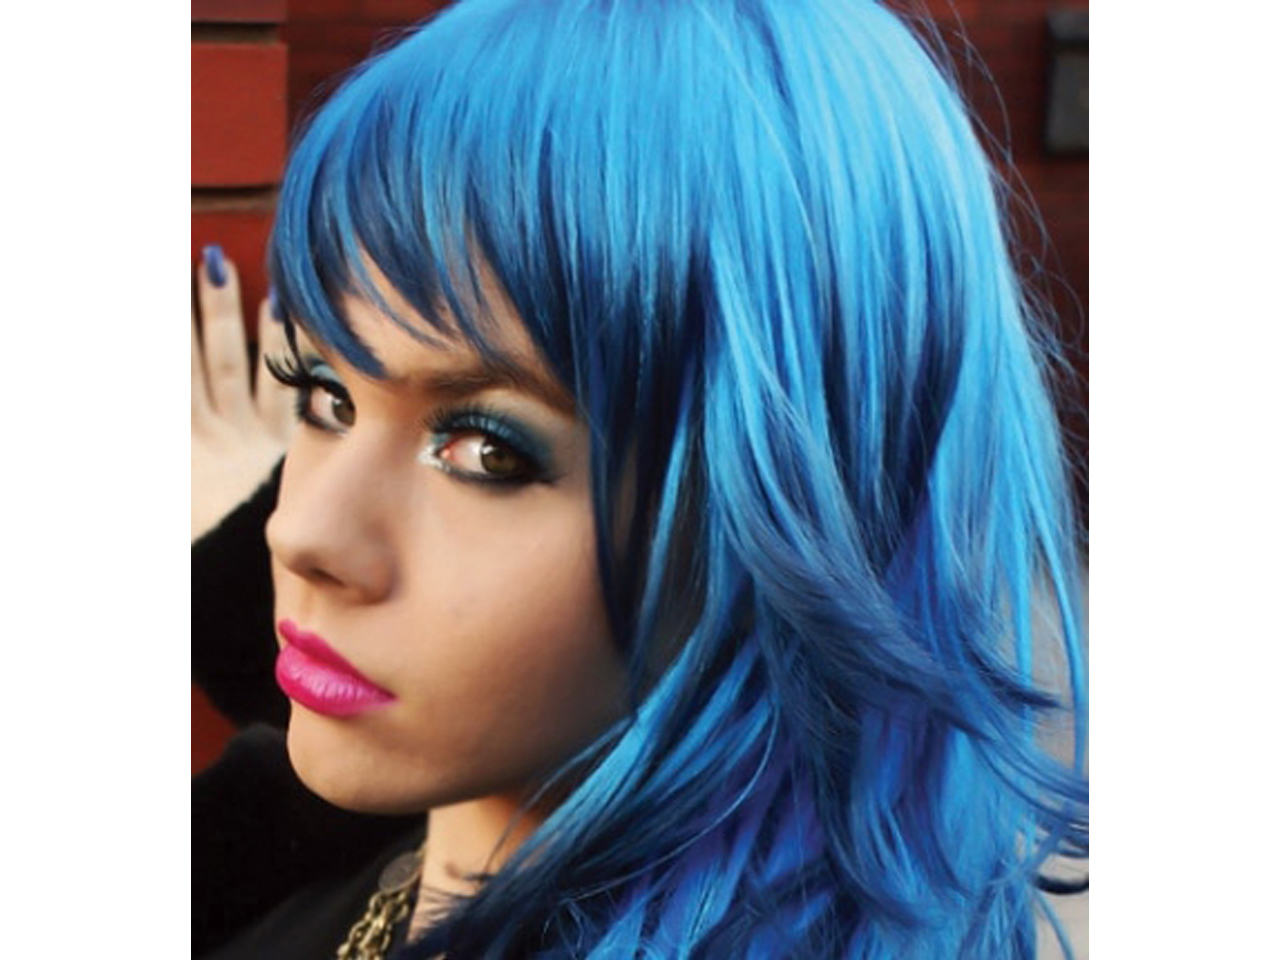 5. Lagoon Blue Hair Dye from Directions - wide 11